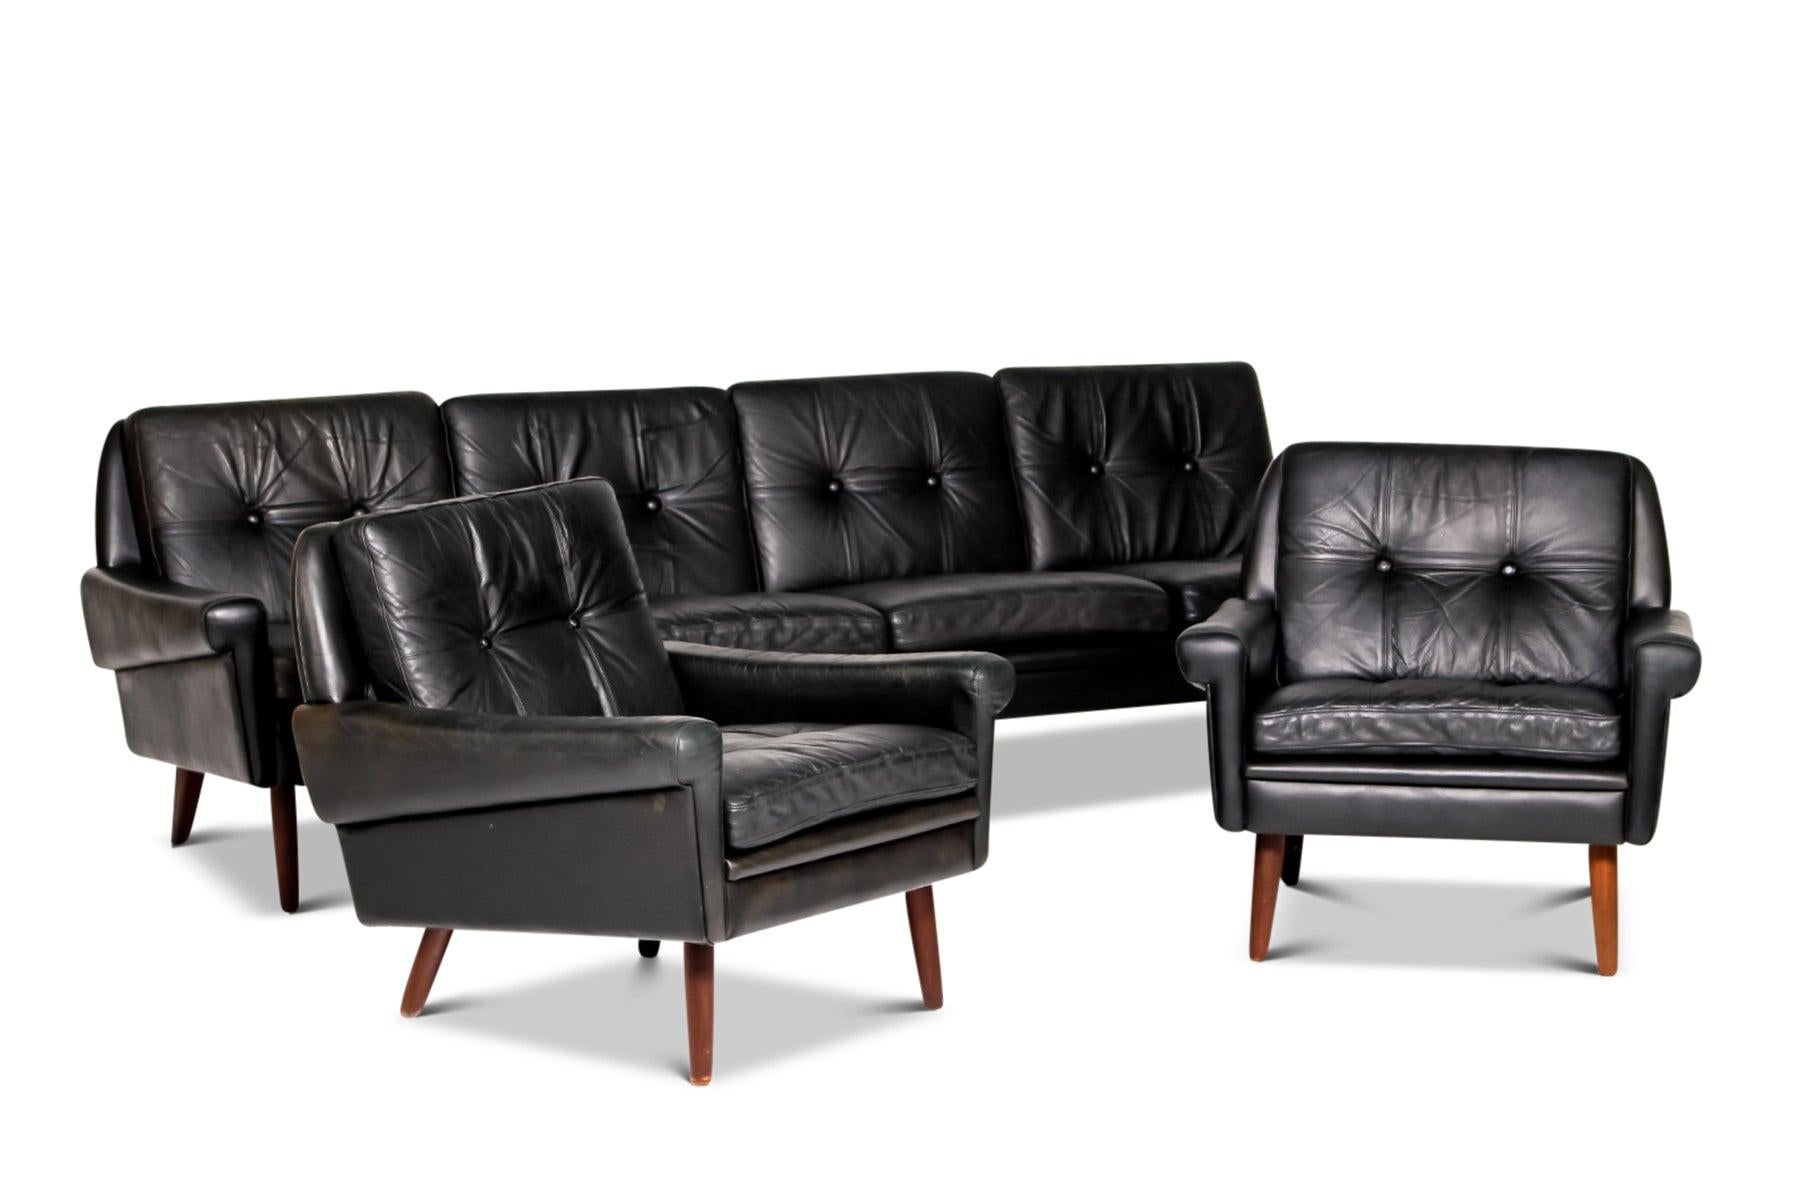 Mid-Century Modern Svend Skipper Four Seat Sofa in Black Leather + Pair of Matching Armchairs